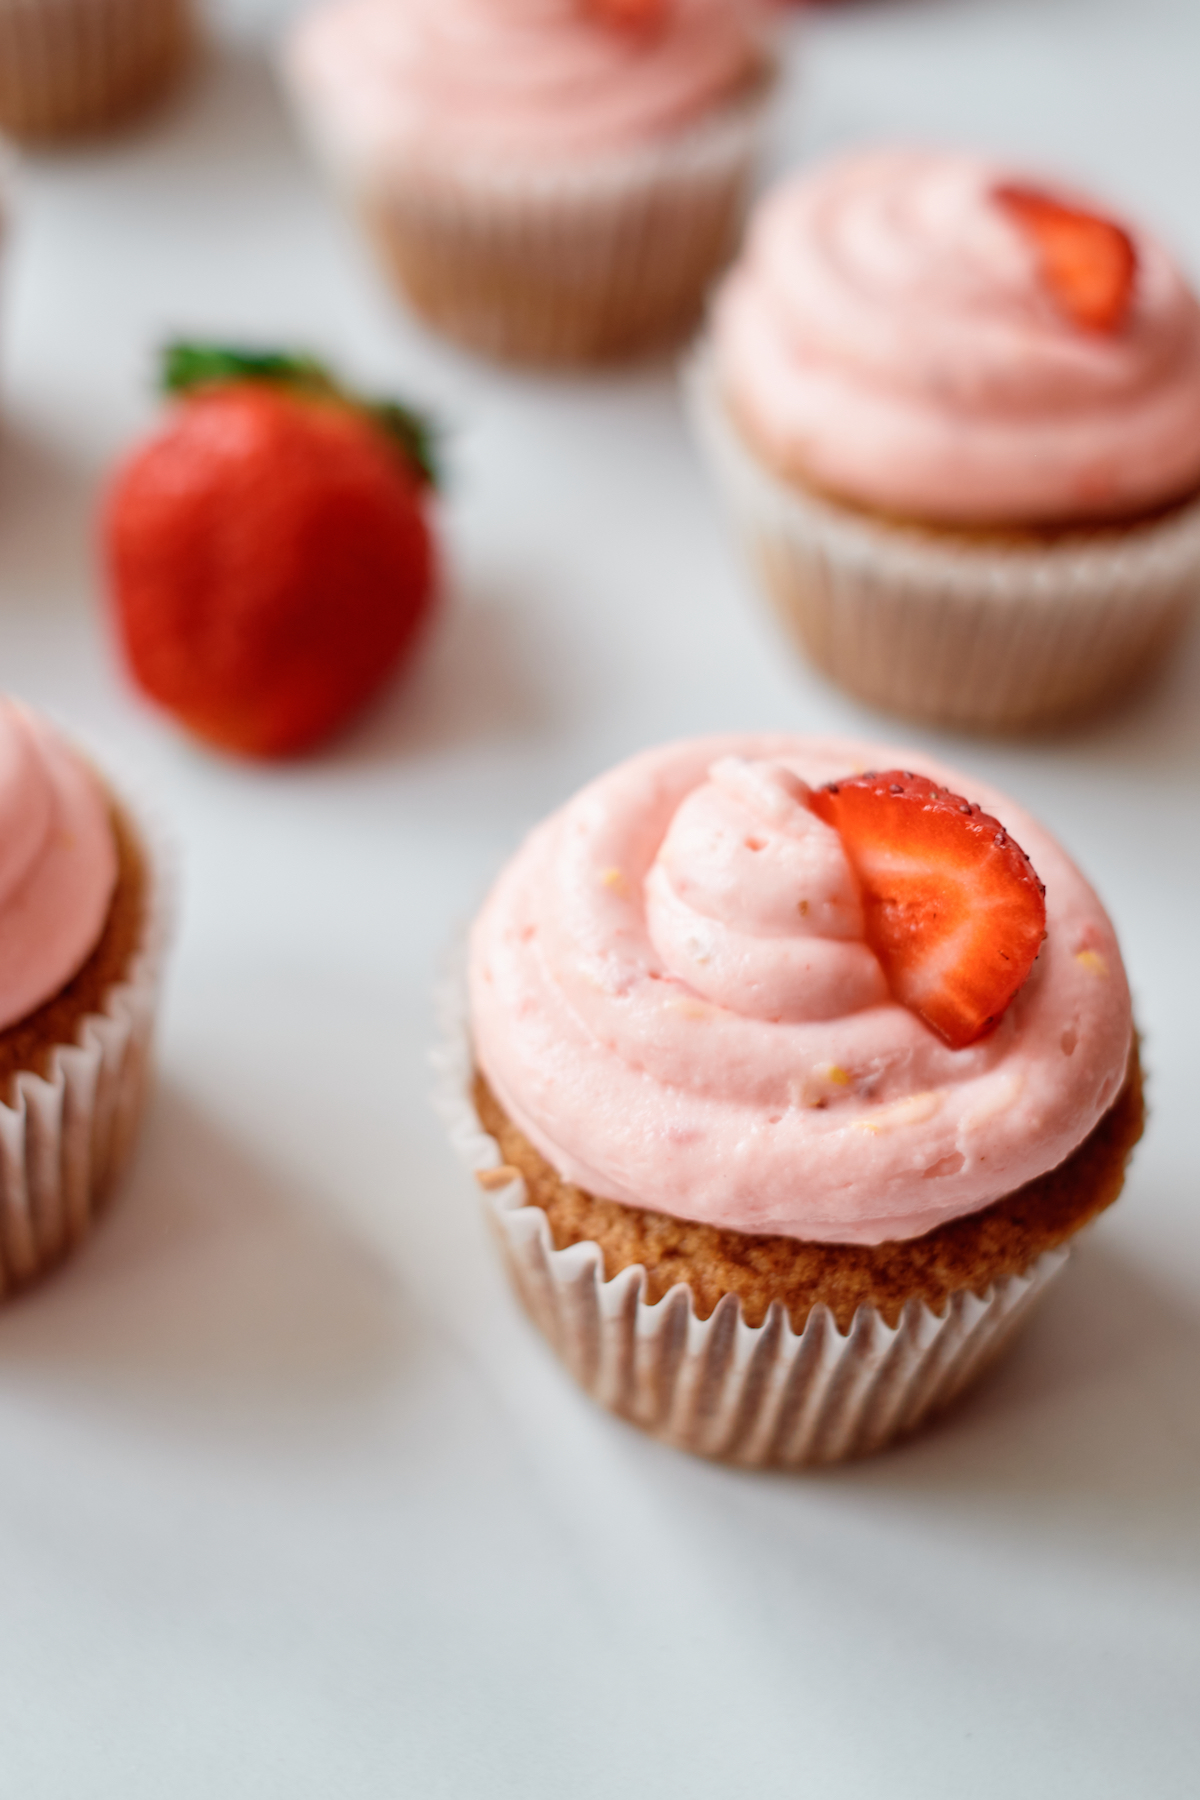 the finished strawberry cupcakes with churro flavors lined up on a countertop